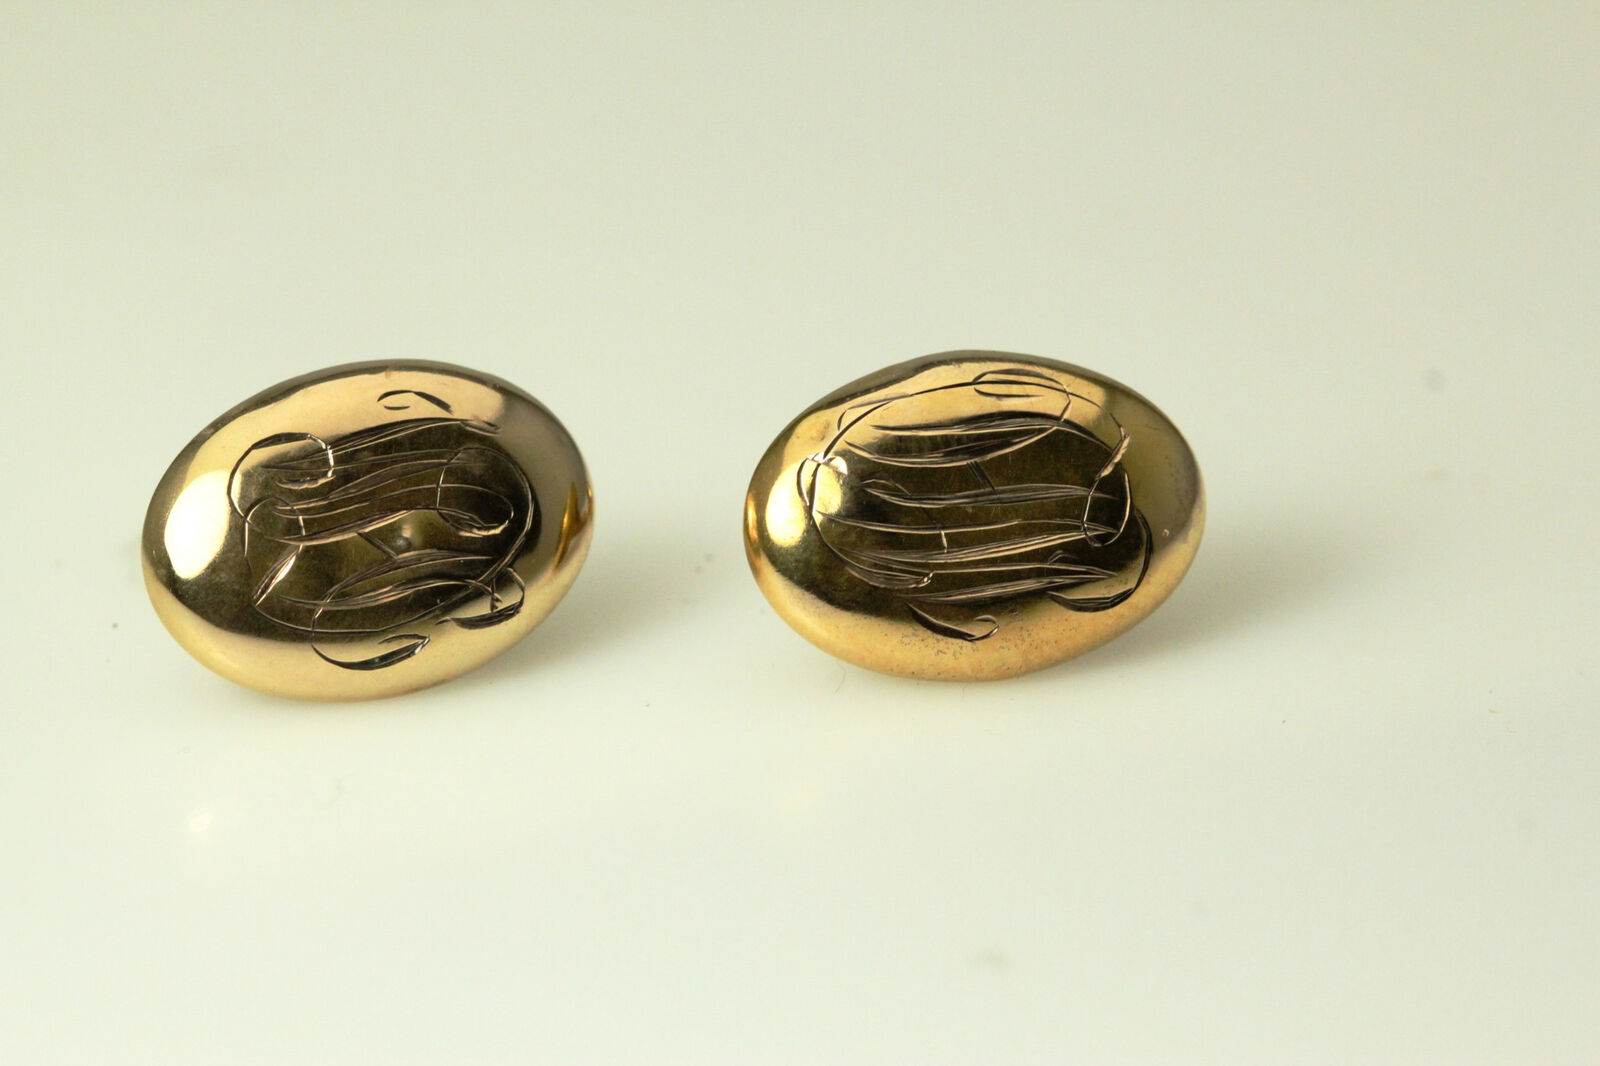 Gold Filled Monogramed Cuff Links Dented Good Condition 3 Grams (ANT2802)